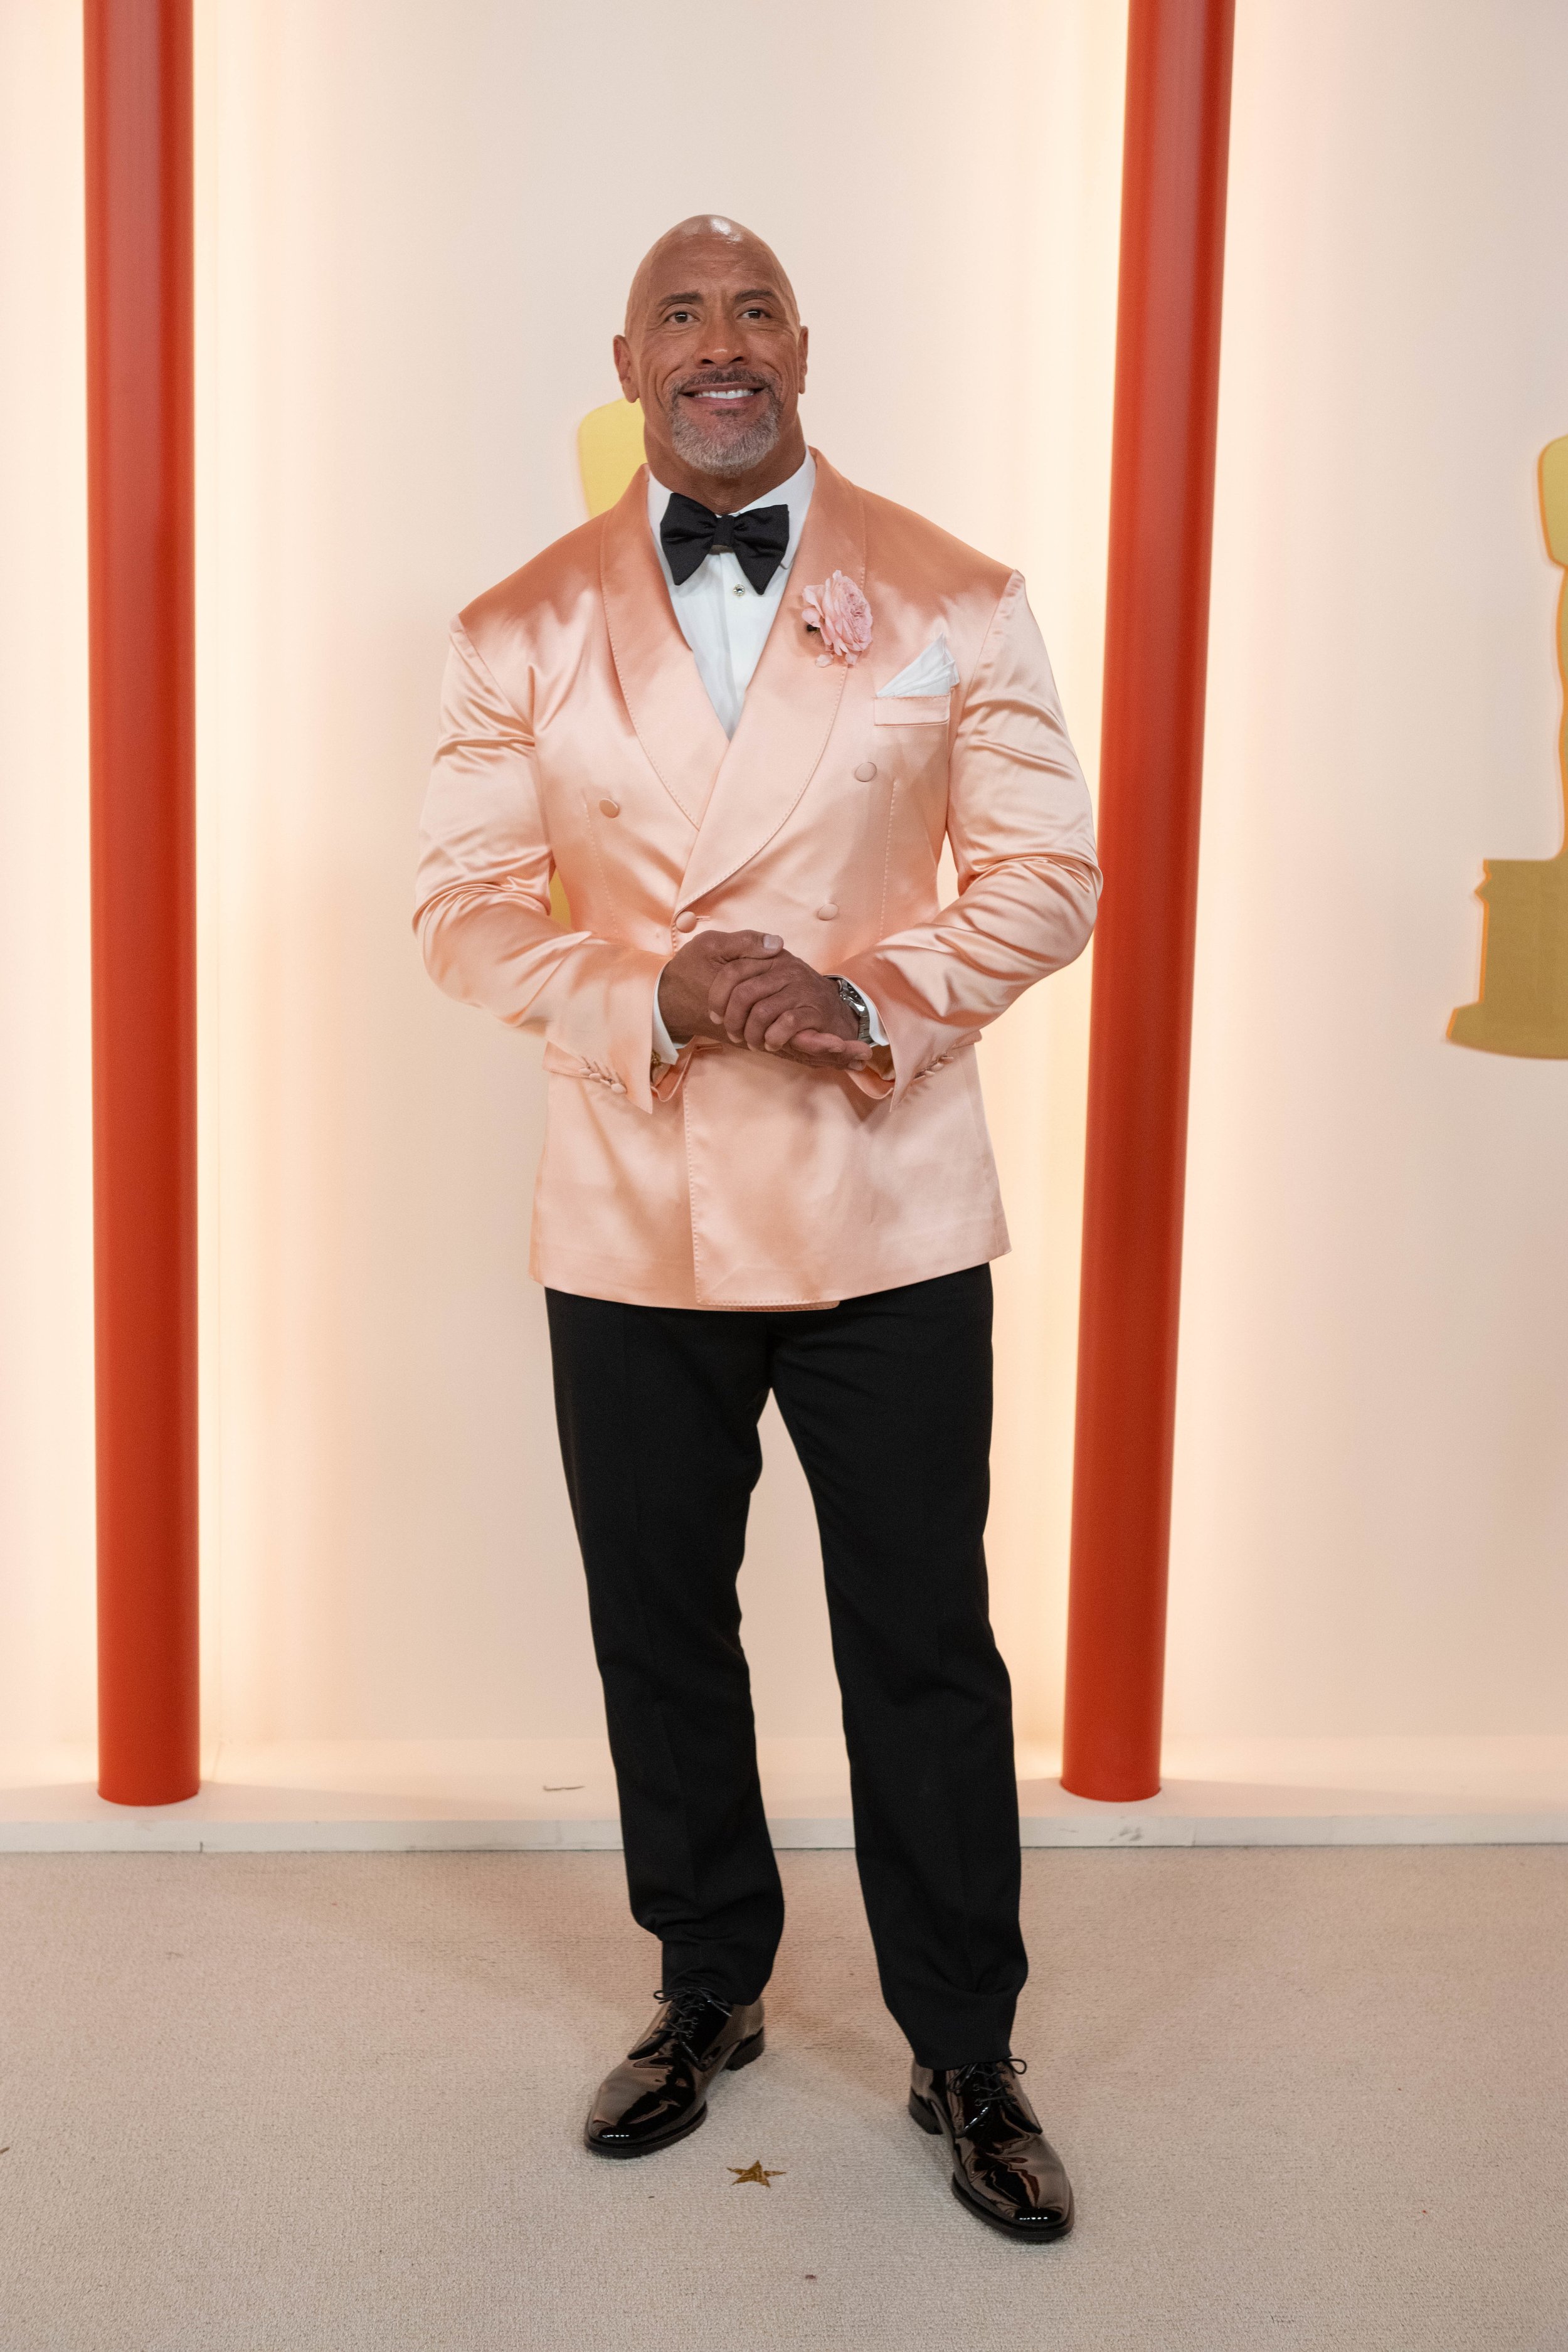 Dwayne Johnson arrives on the red carpet of the 95th Oscars® at the Dolby